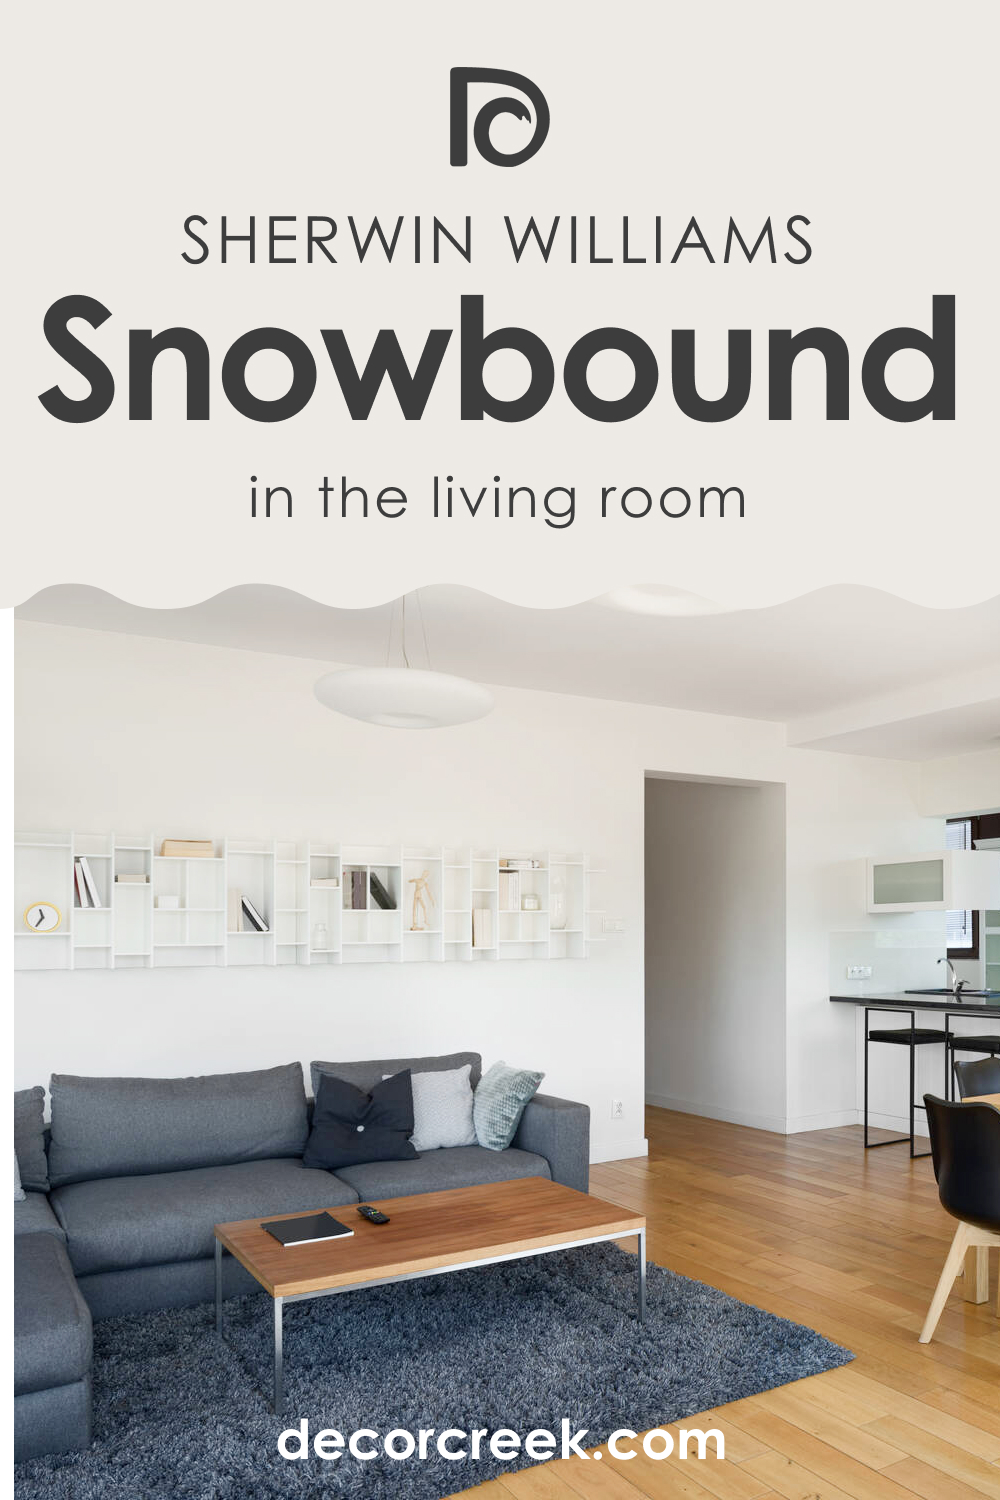 How to Use Snowbound SW 7004 in the Living Room?